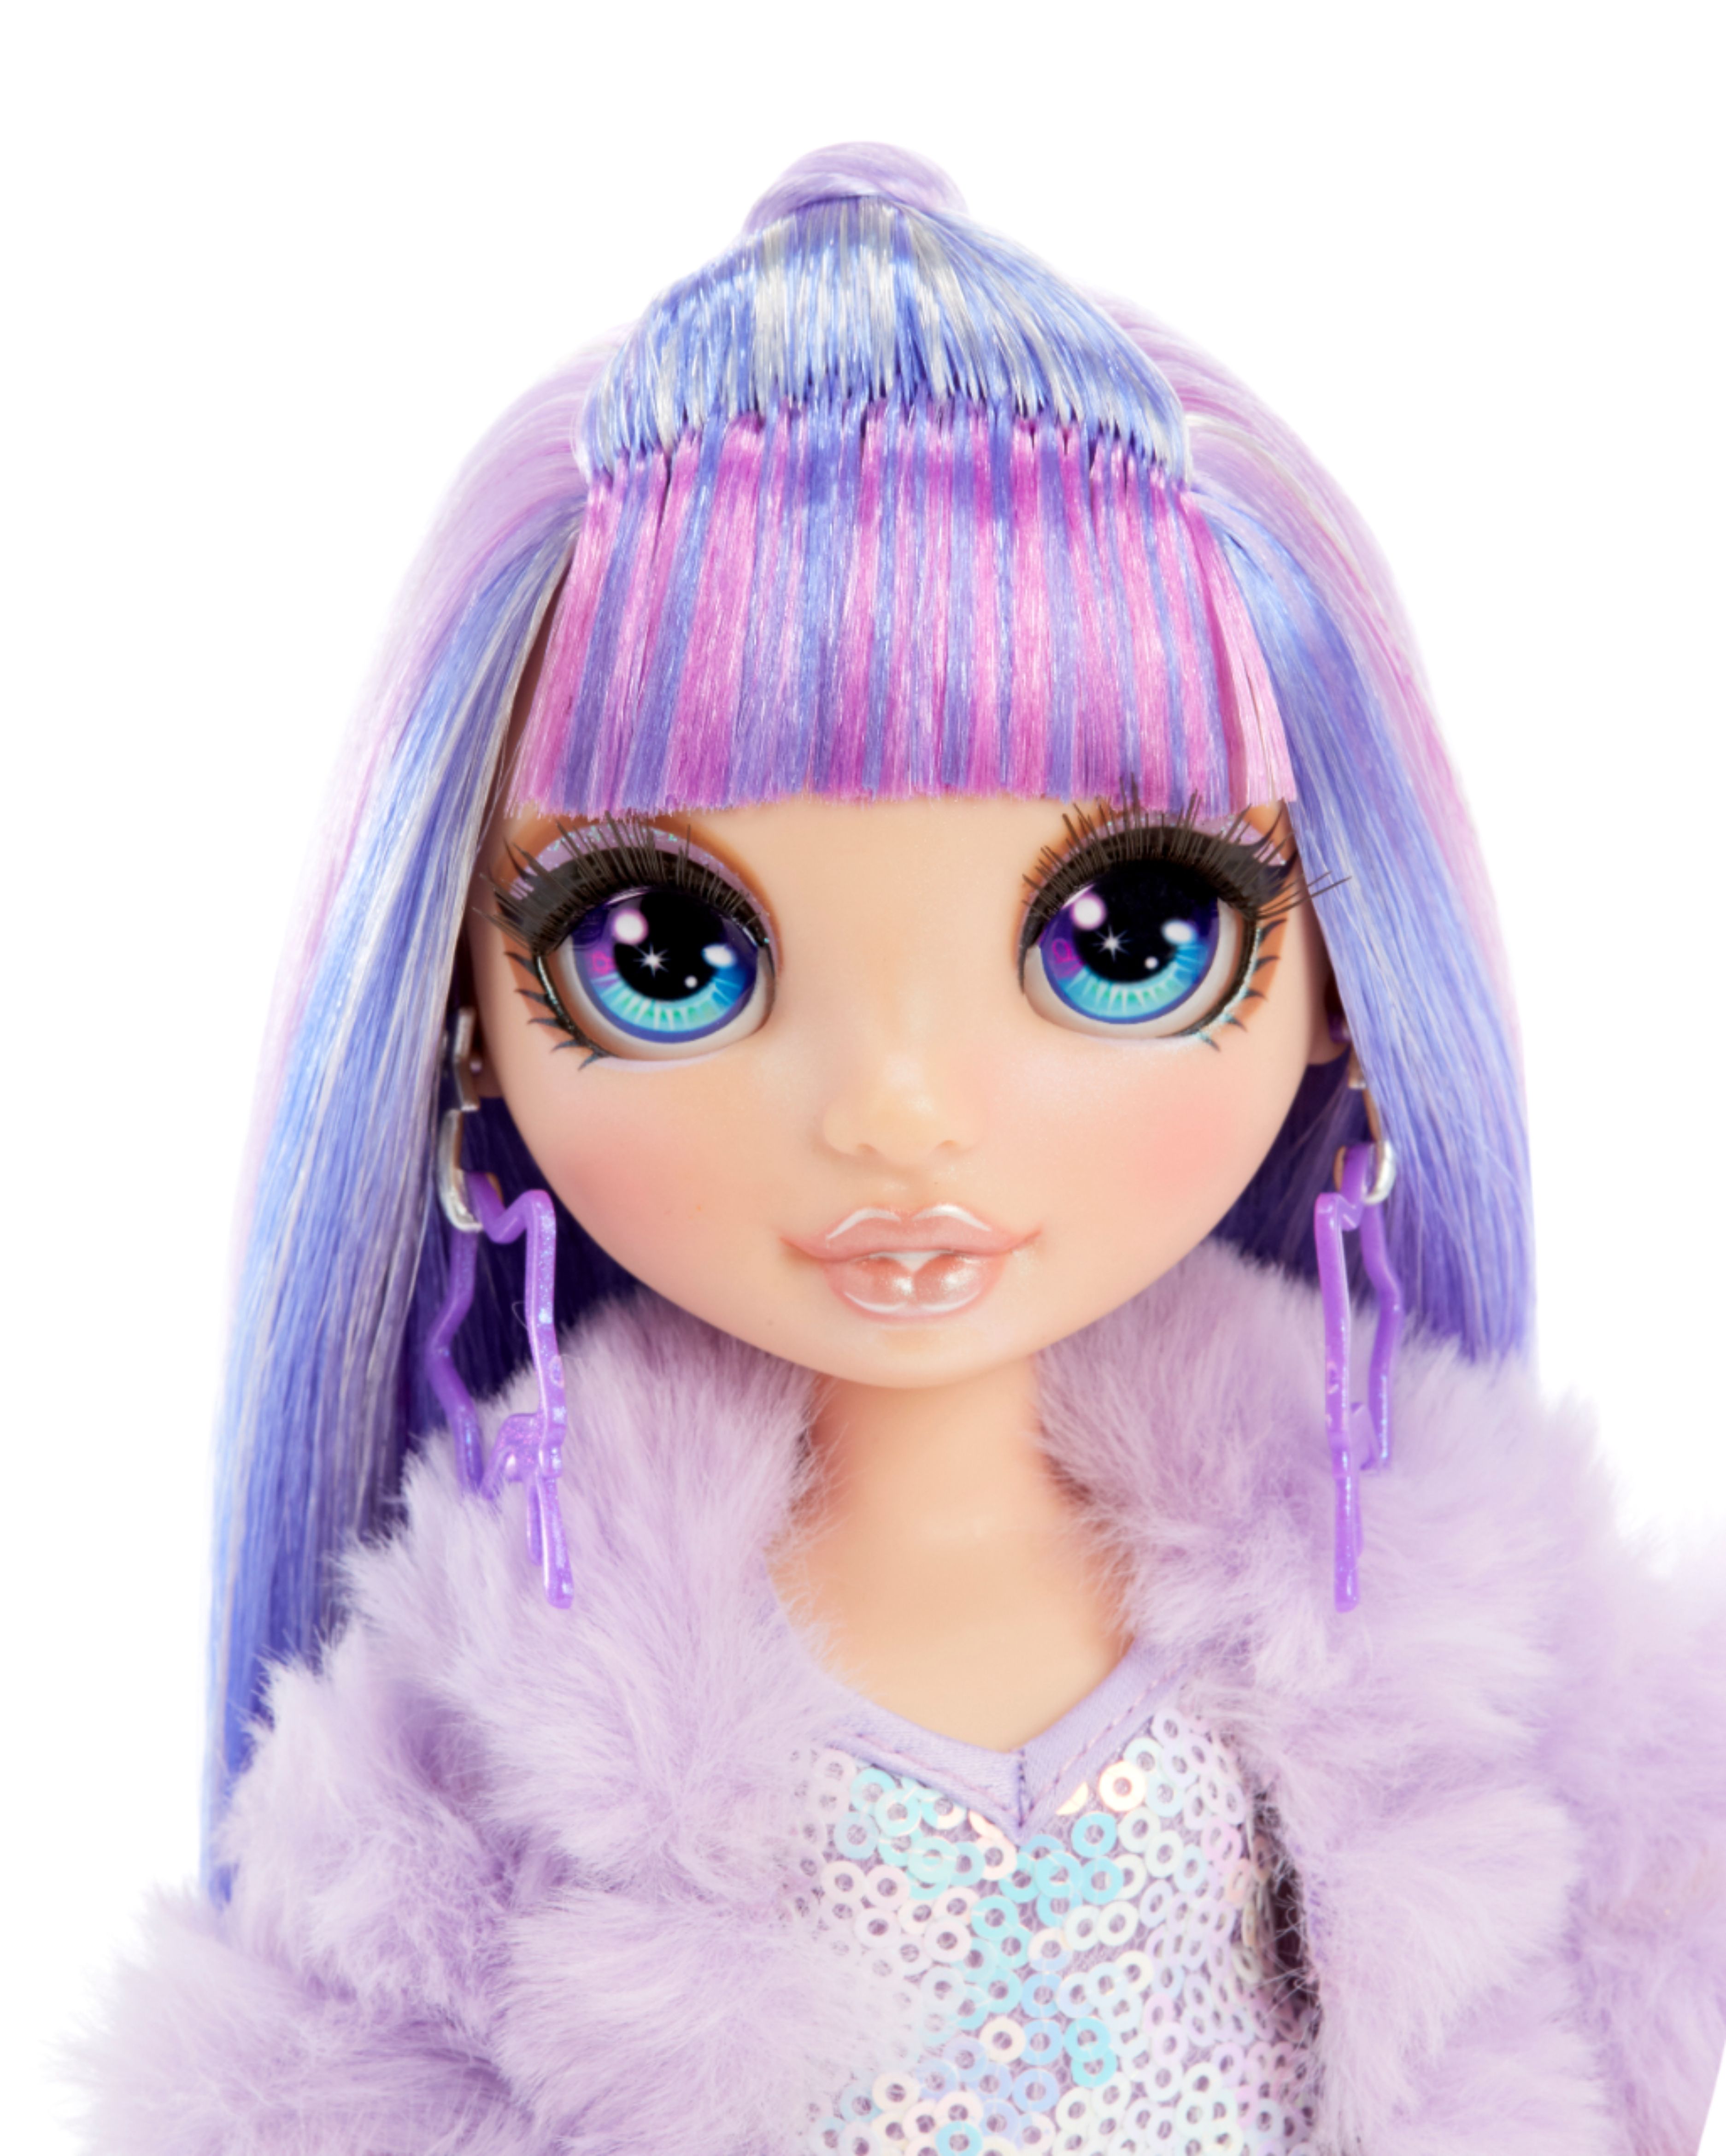 Best Buy: Rainbow High Fashion Doll- Violet Willow 569602